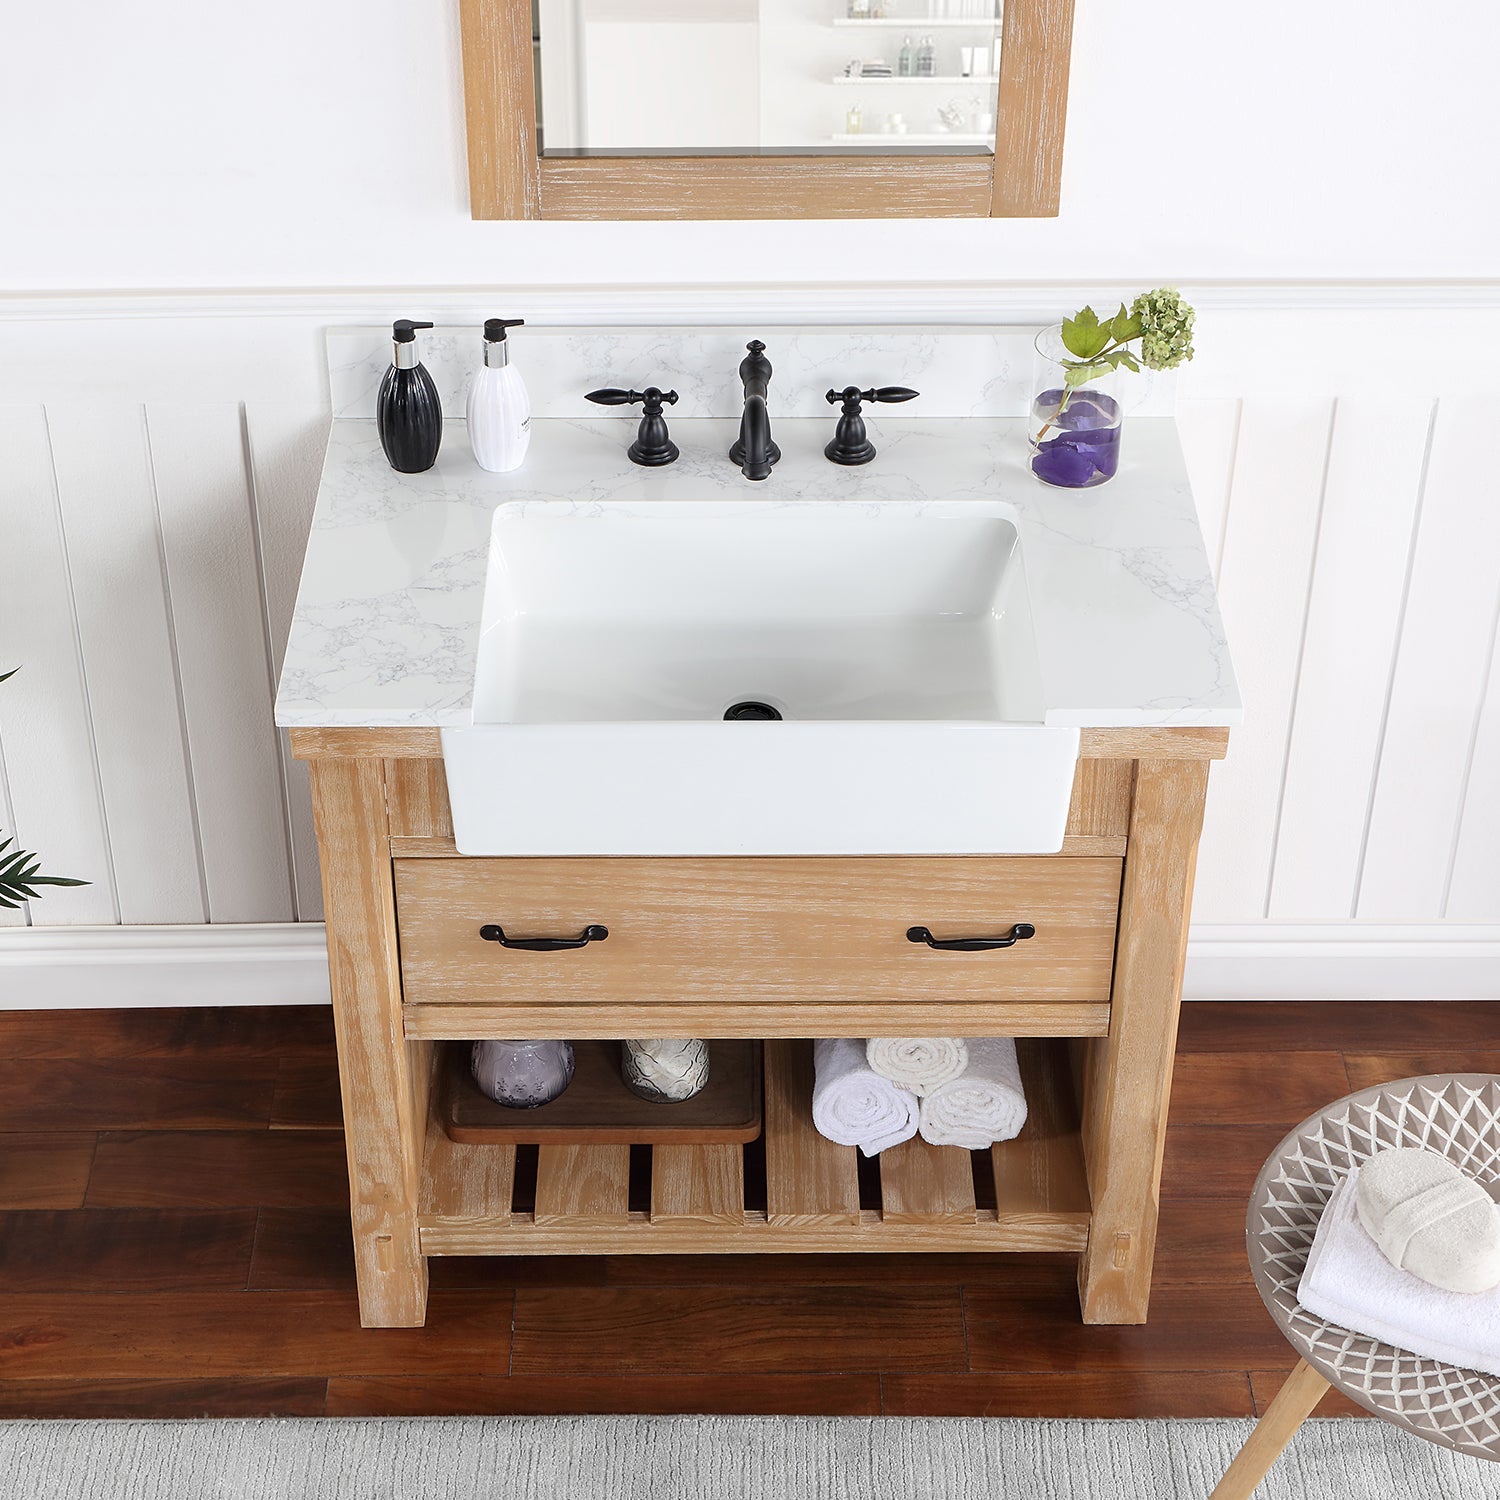 Vinnova Design Villareal 36" Single Vanity in Weathered Pine with Composite Stone Top in White, White Farmhouse Basin - New Star Living